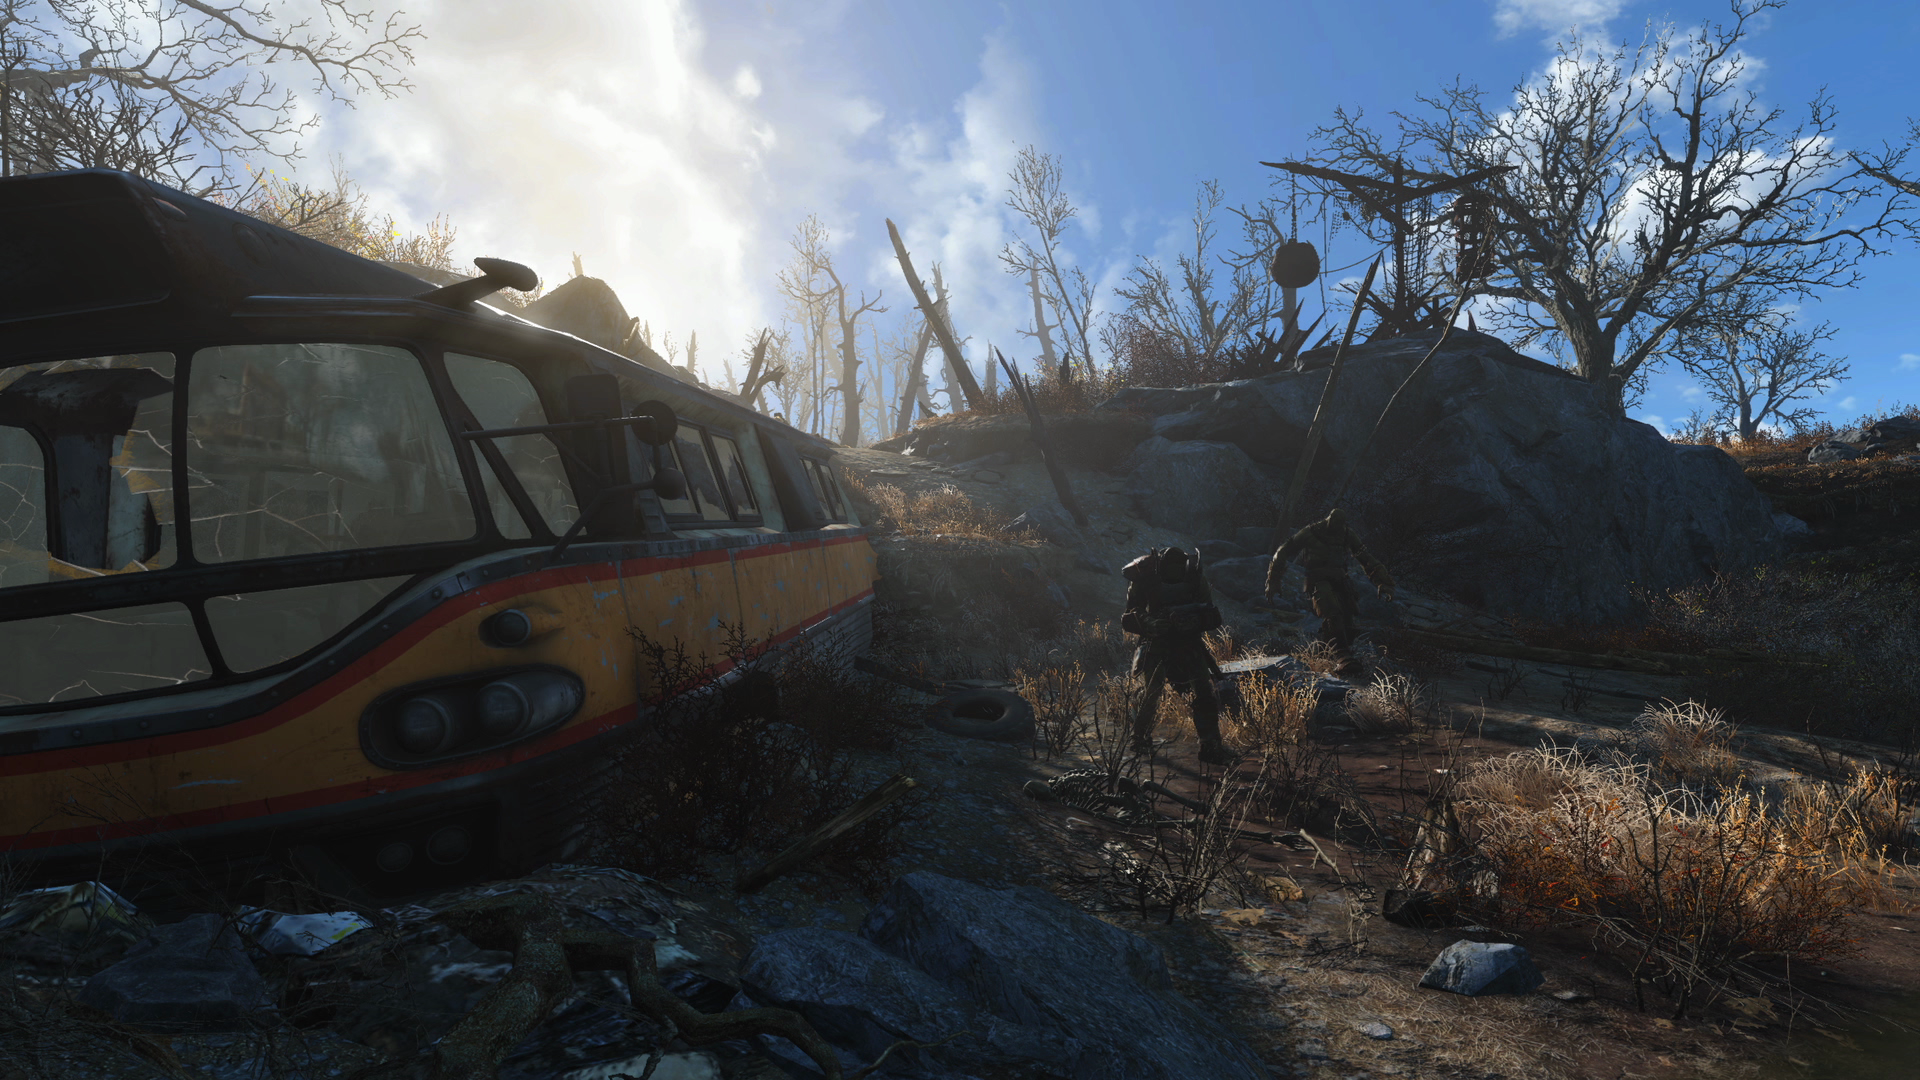 Media asset in full size related to 3dfxzone.it news item entitled as follows: Primi trailer e screenshot ufficiali in Full HD del game Fallout 4 di Bethesda | Image Name: news22682_Bethesda-Fallout-4-screenshot_4.png